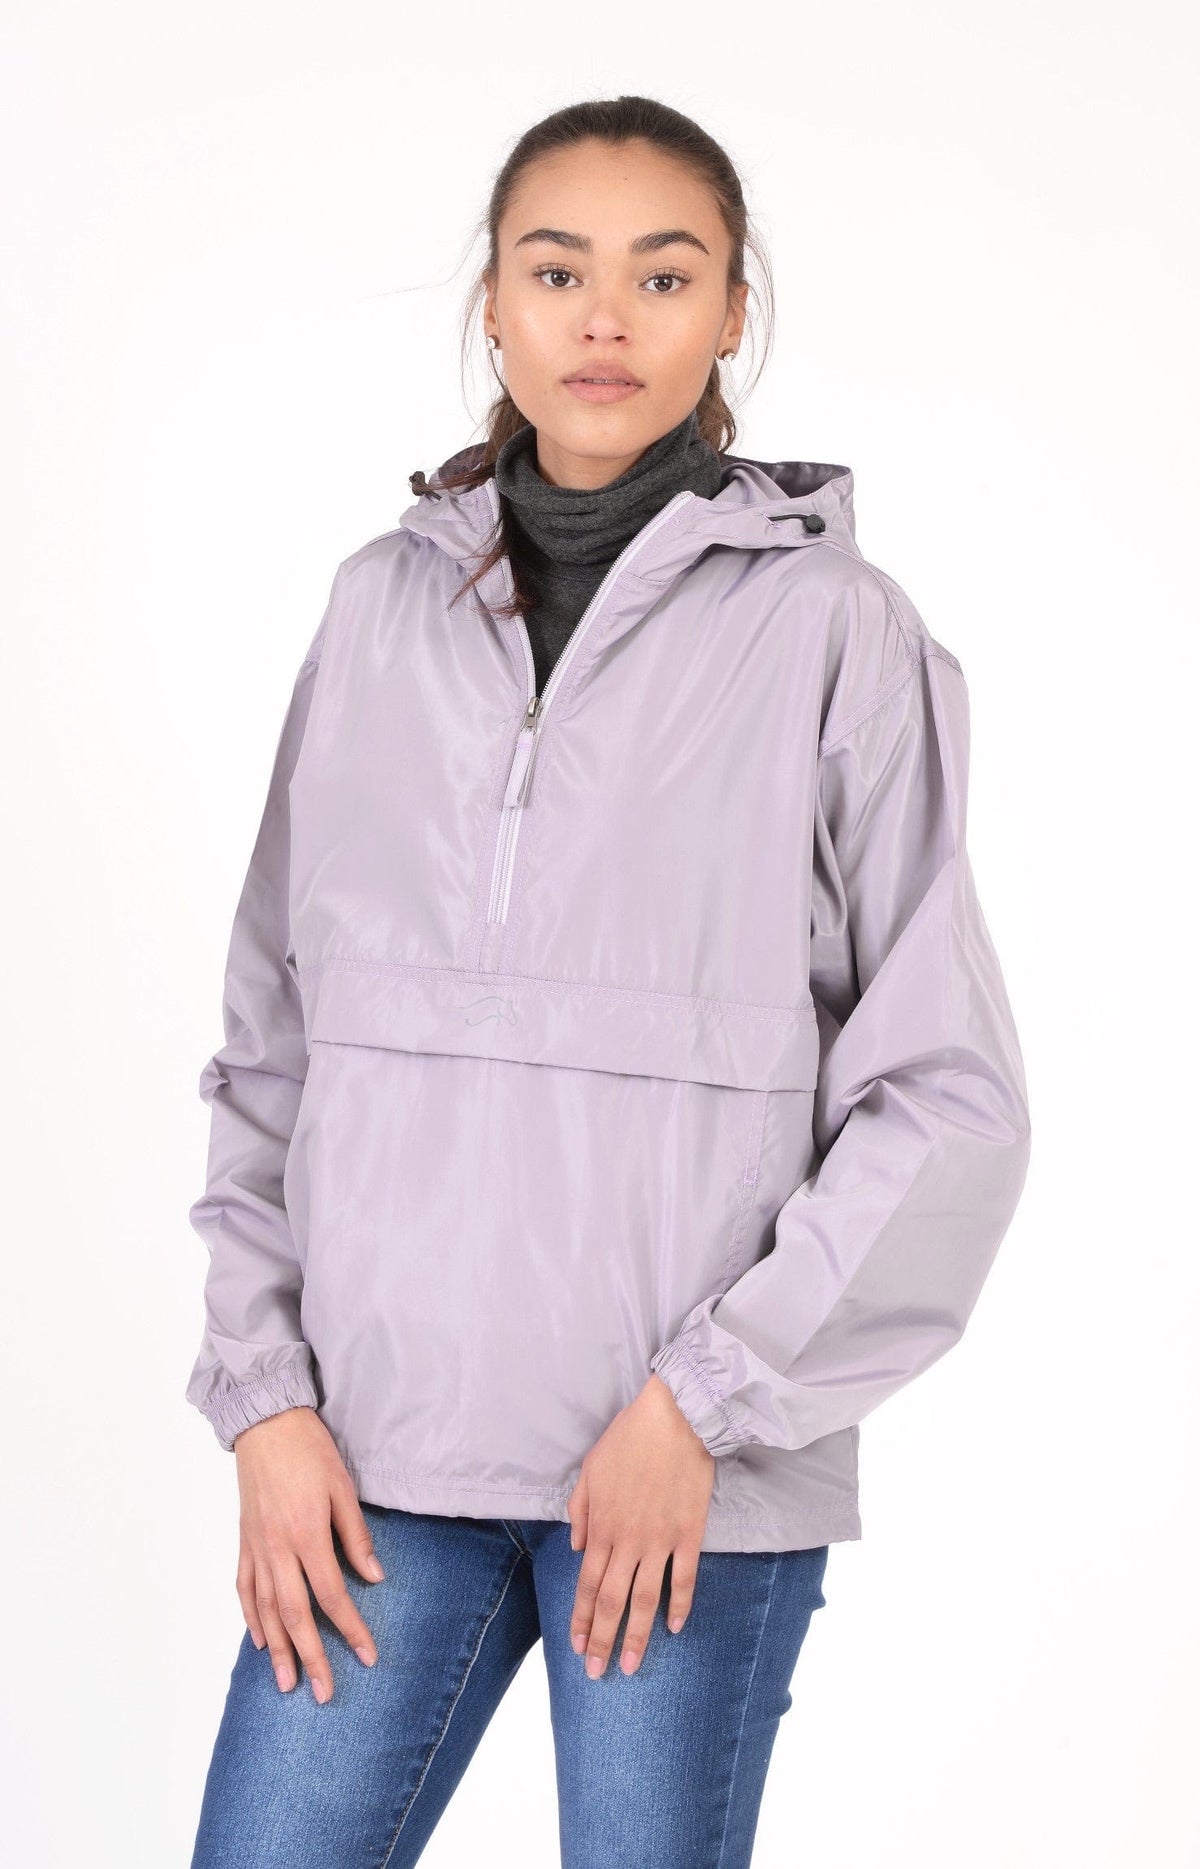 Chestnut Bay rain coat Chestnut Bay Rainy Day Pullover equestrian team apparel online tack store mobile tack store custom farm apparel custom show stable clothing equestrian lifestyle horse show clothing riding clothes horses equestrian tack store